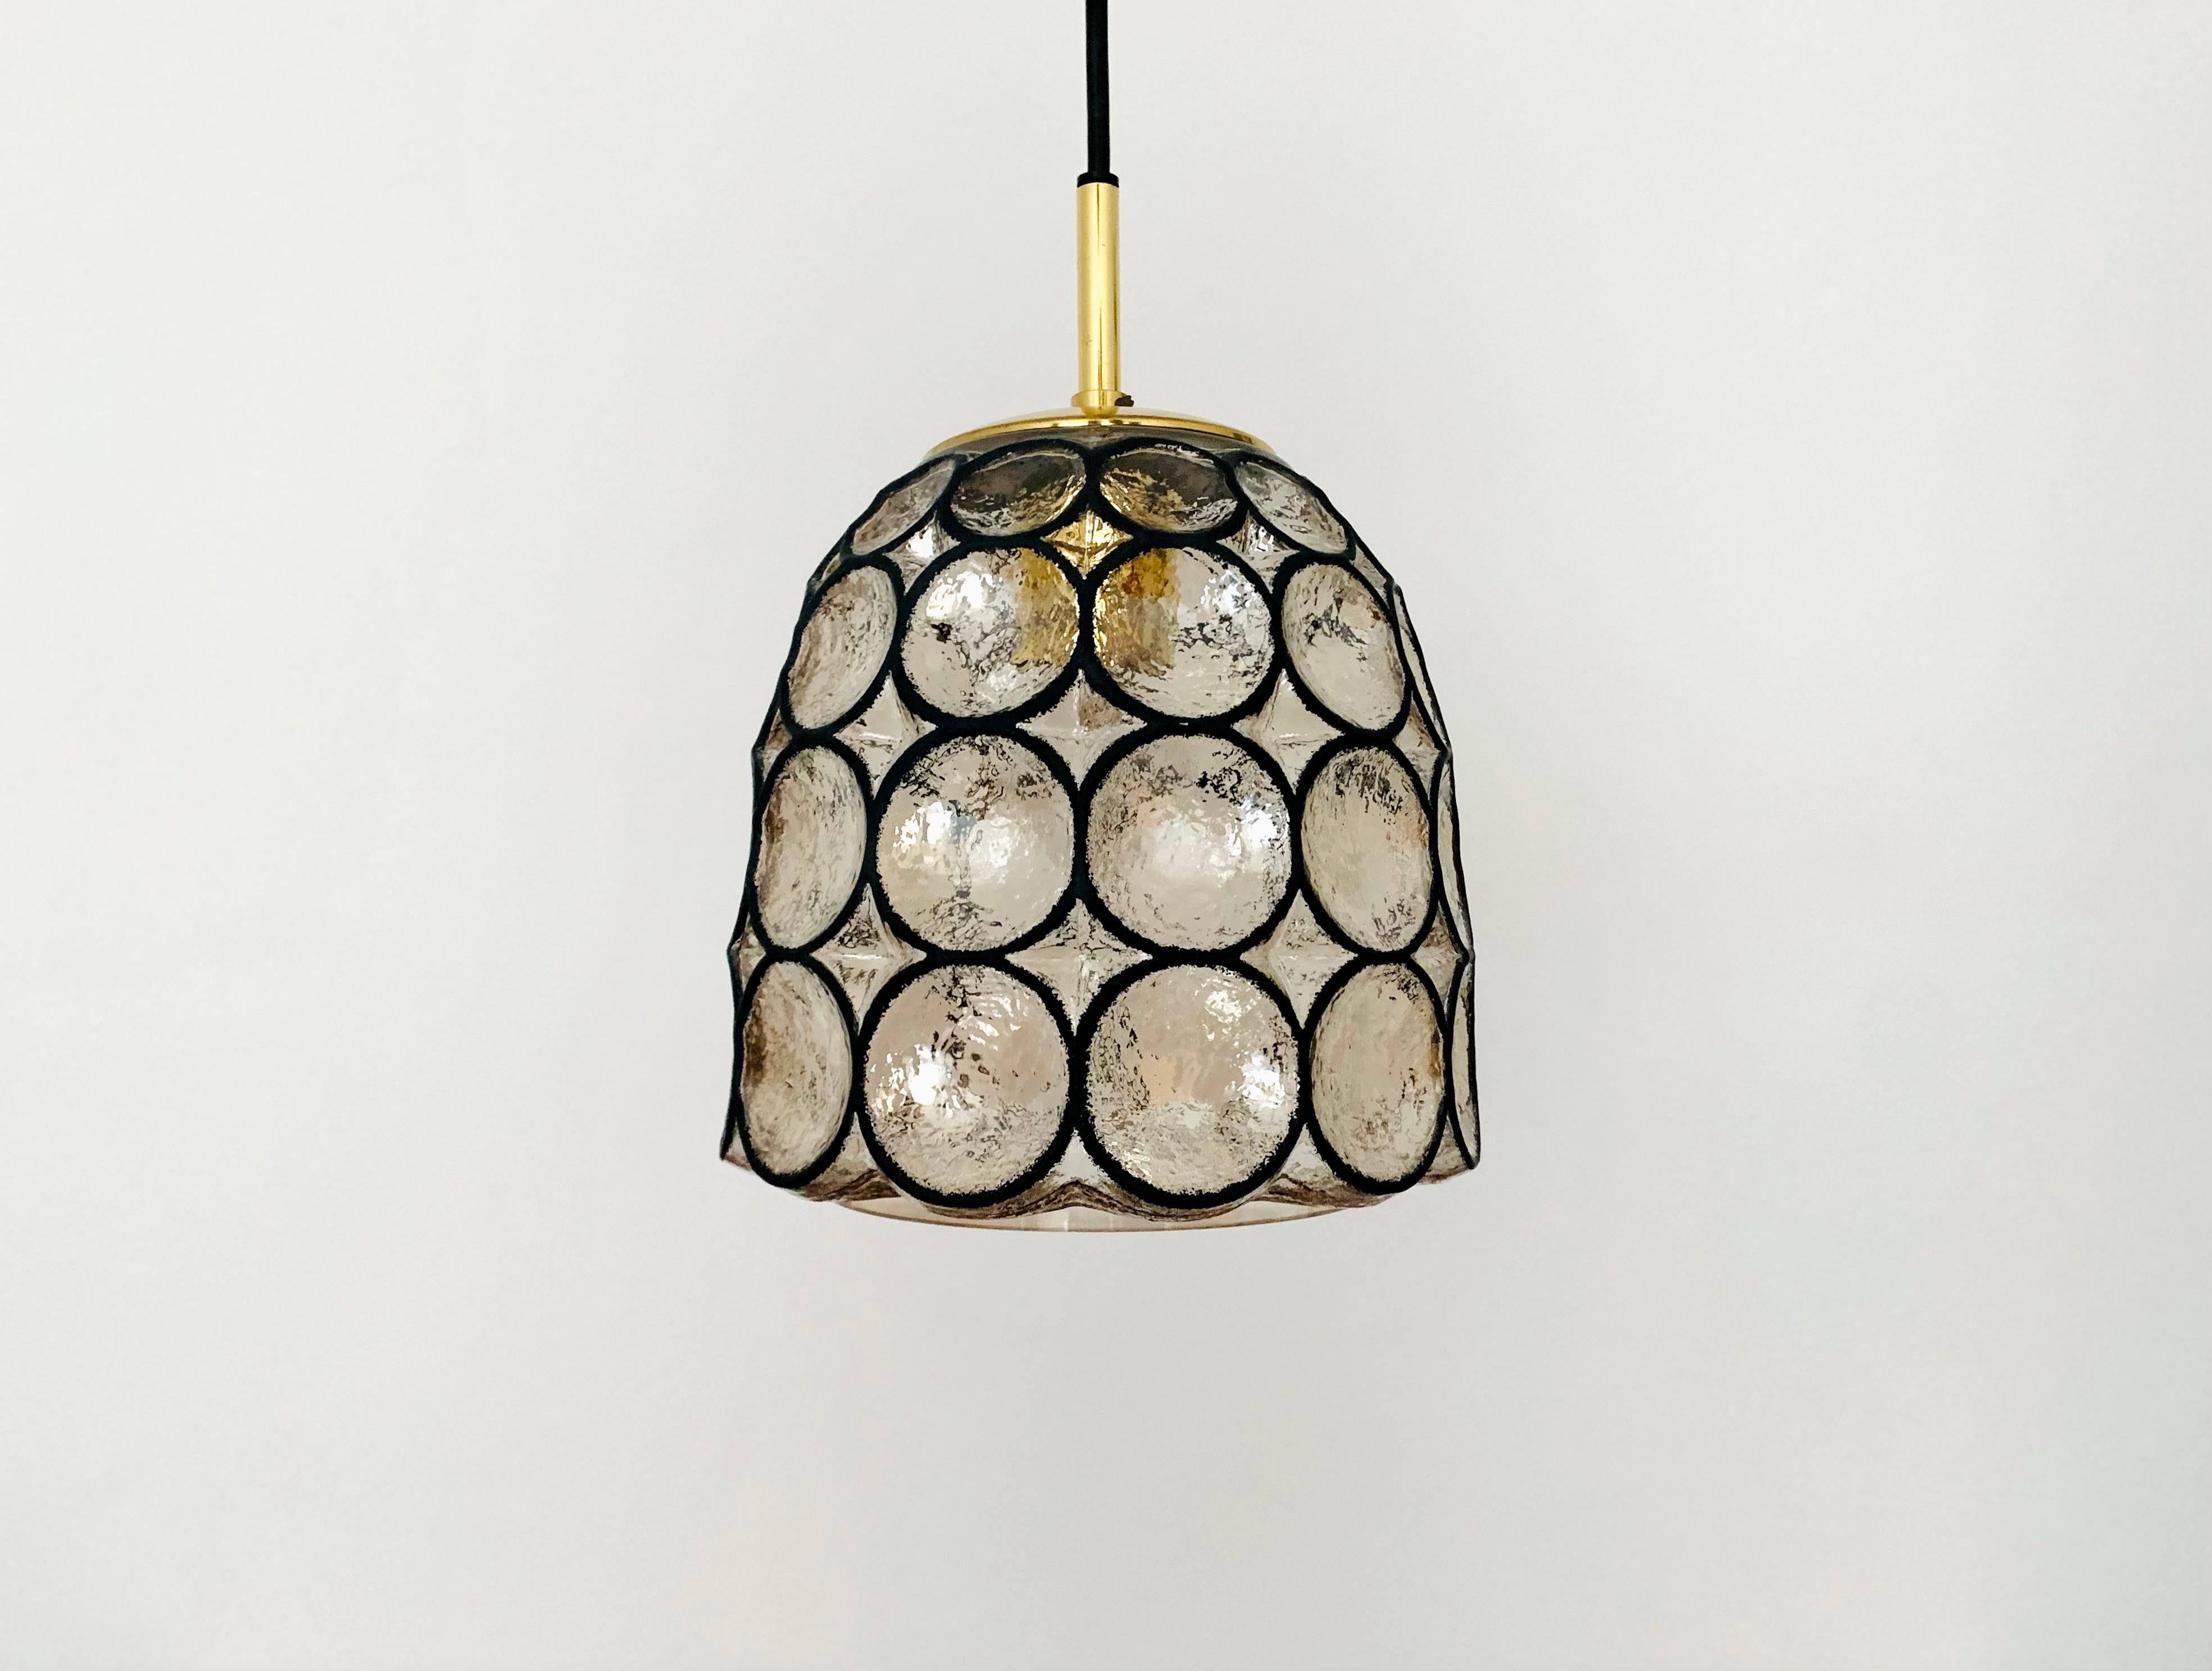 Very beautiful and rare pendant lamp from the 1960s.
The mouth-blown glass with the iron ring look is a real eye-catcher and impressively beautifully designed.
The lamp creates a great play of light in the room and enchants with its